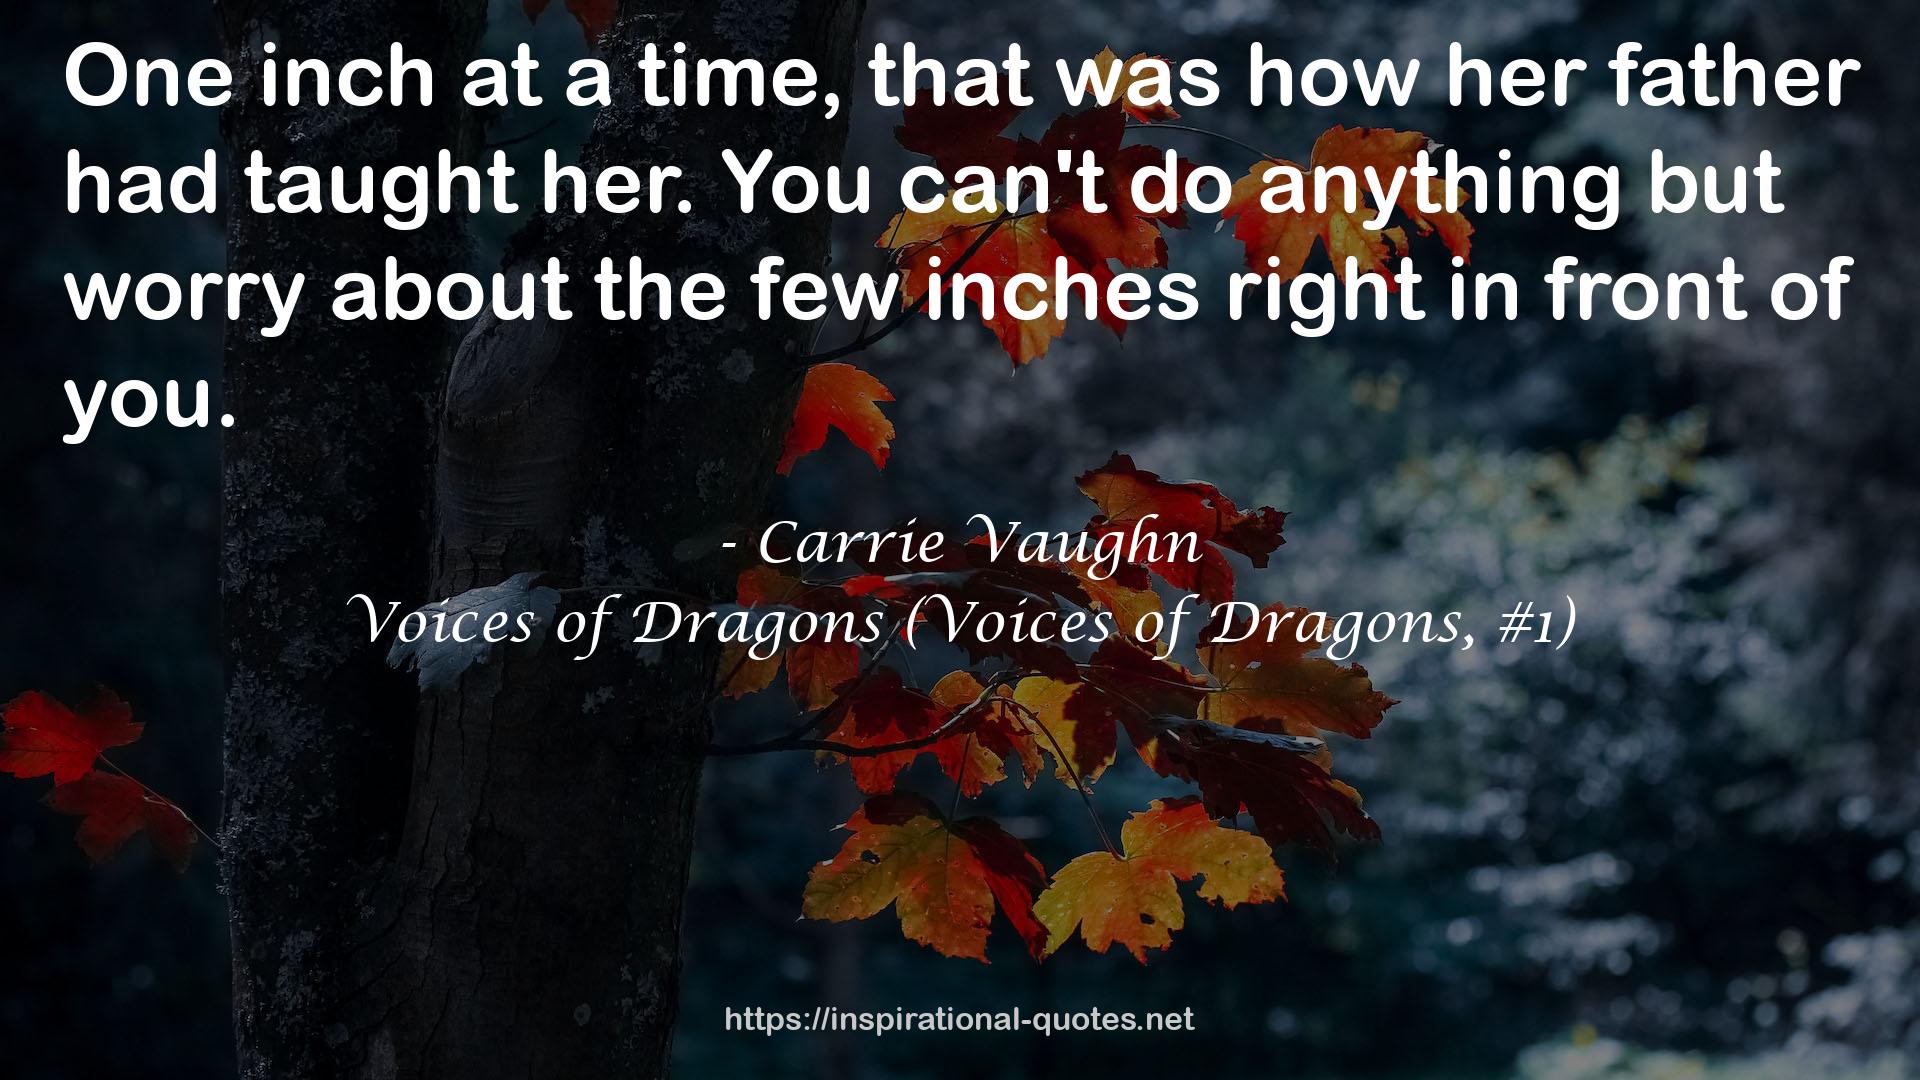 Voices of Dragons (Voices of Dragons, #1) QUOTES